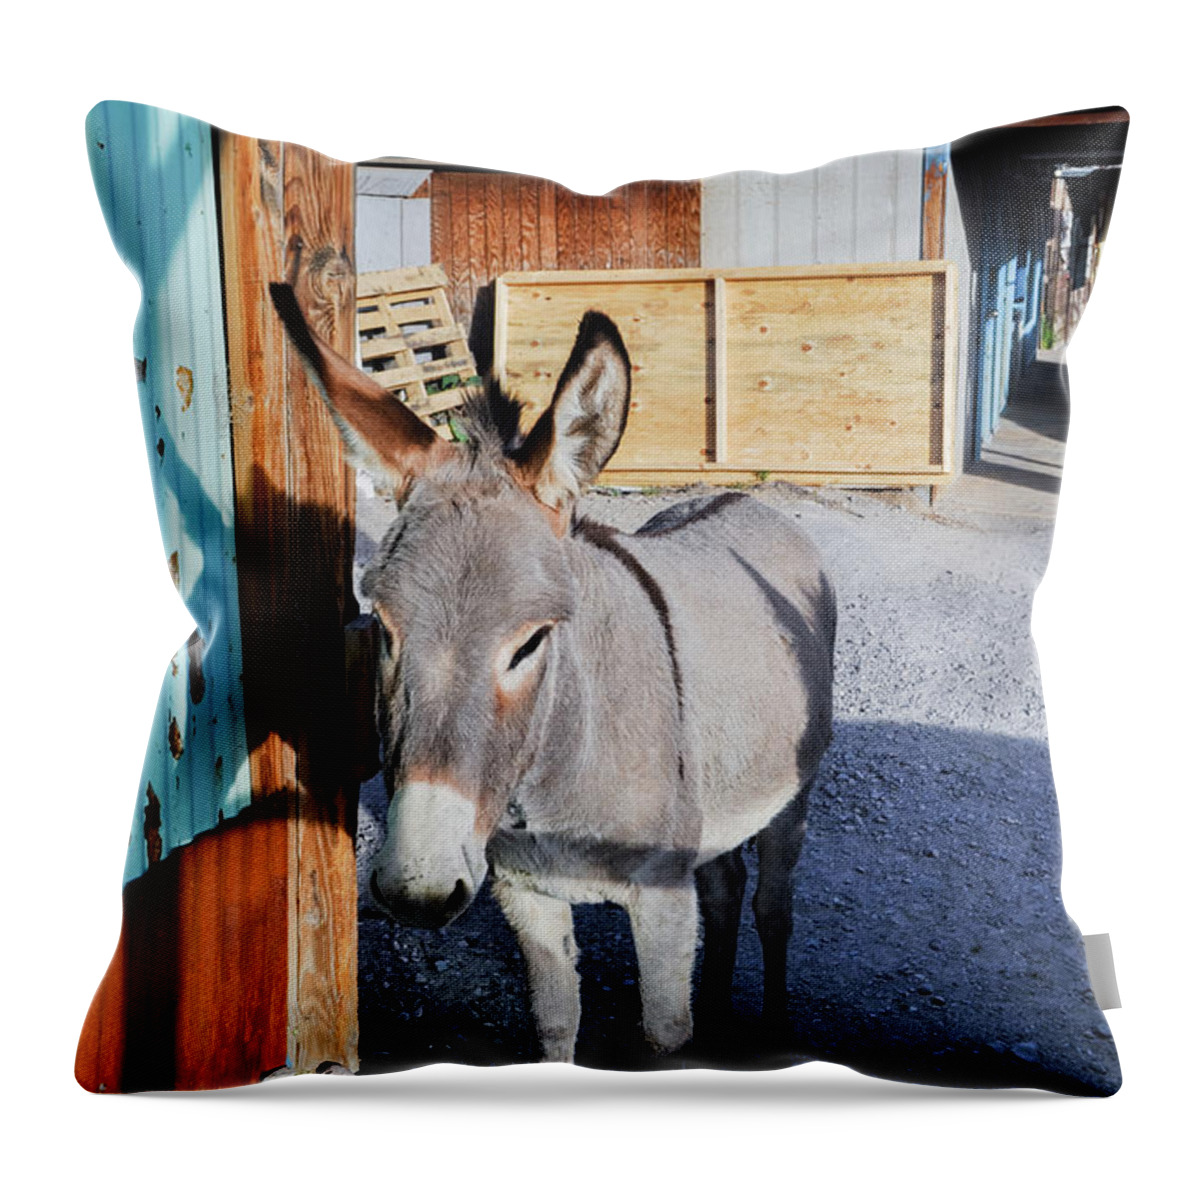 Route 66 Throw Pillow featuring the photograph Famous Route 66 Burro by Kyle Hanson